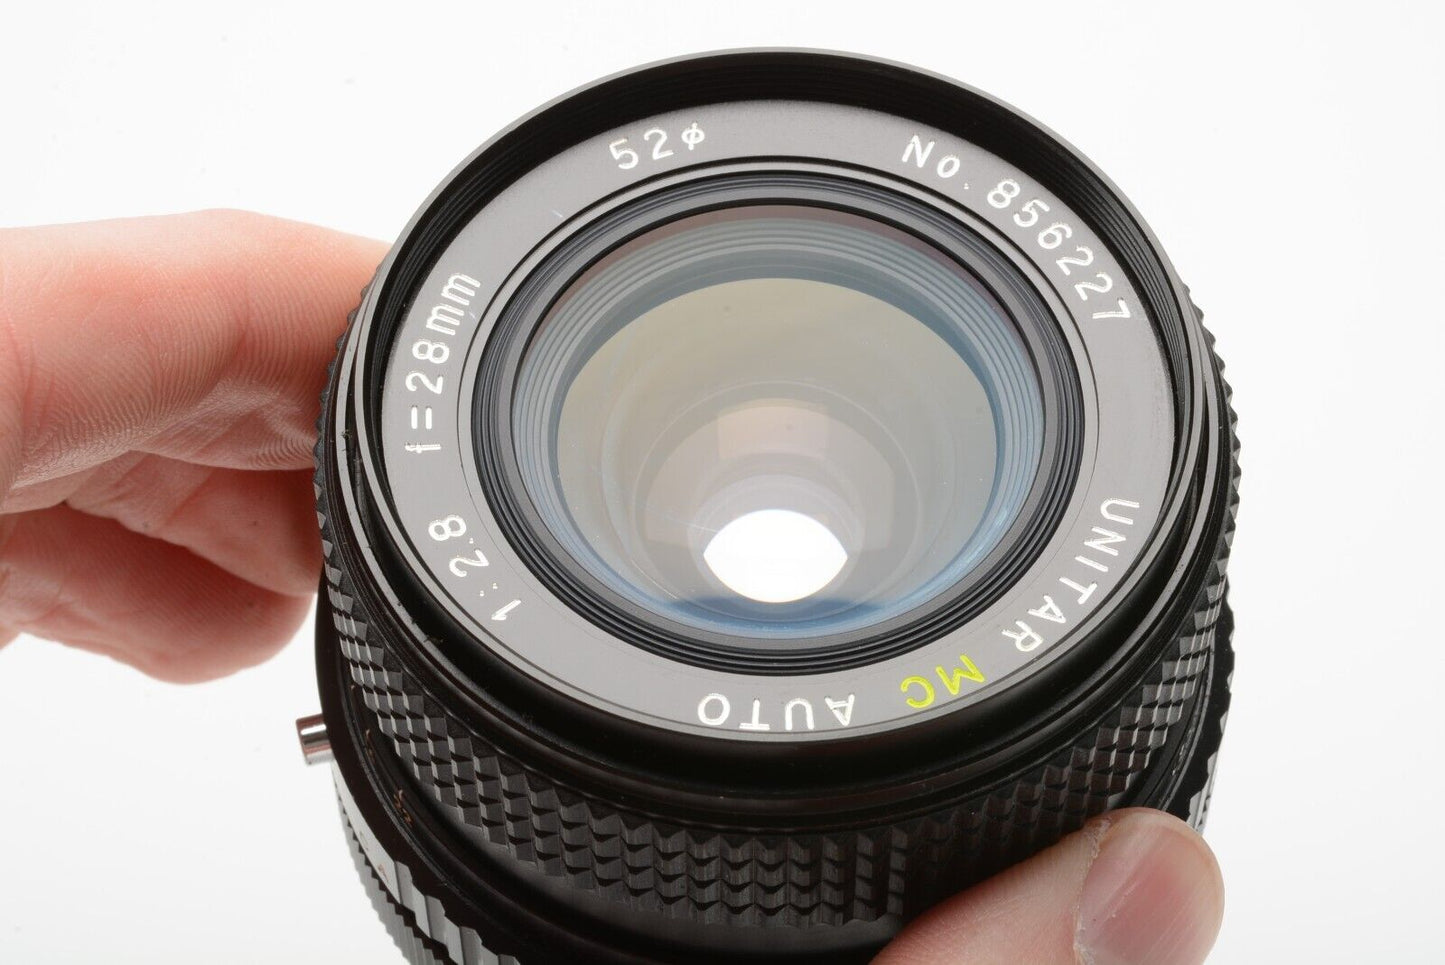 EXC++ UNITAR FOR CANON FD 28mm F2.8 WIDE, CAPS, NICE & SMOOTH